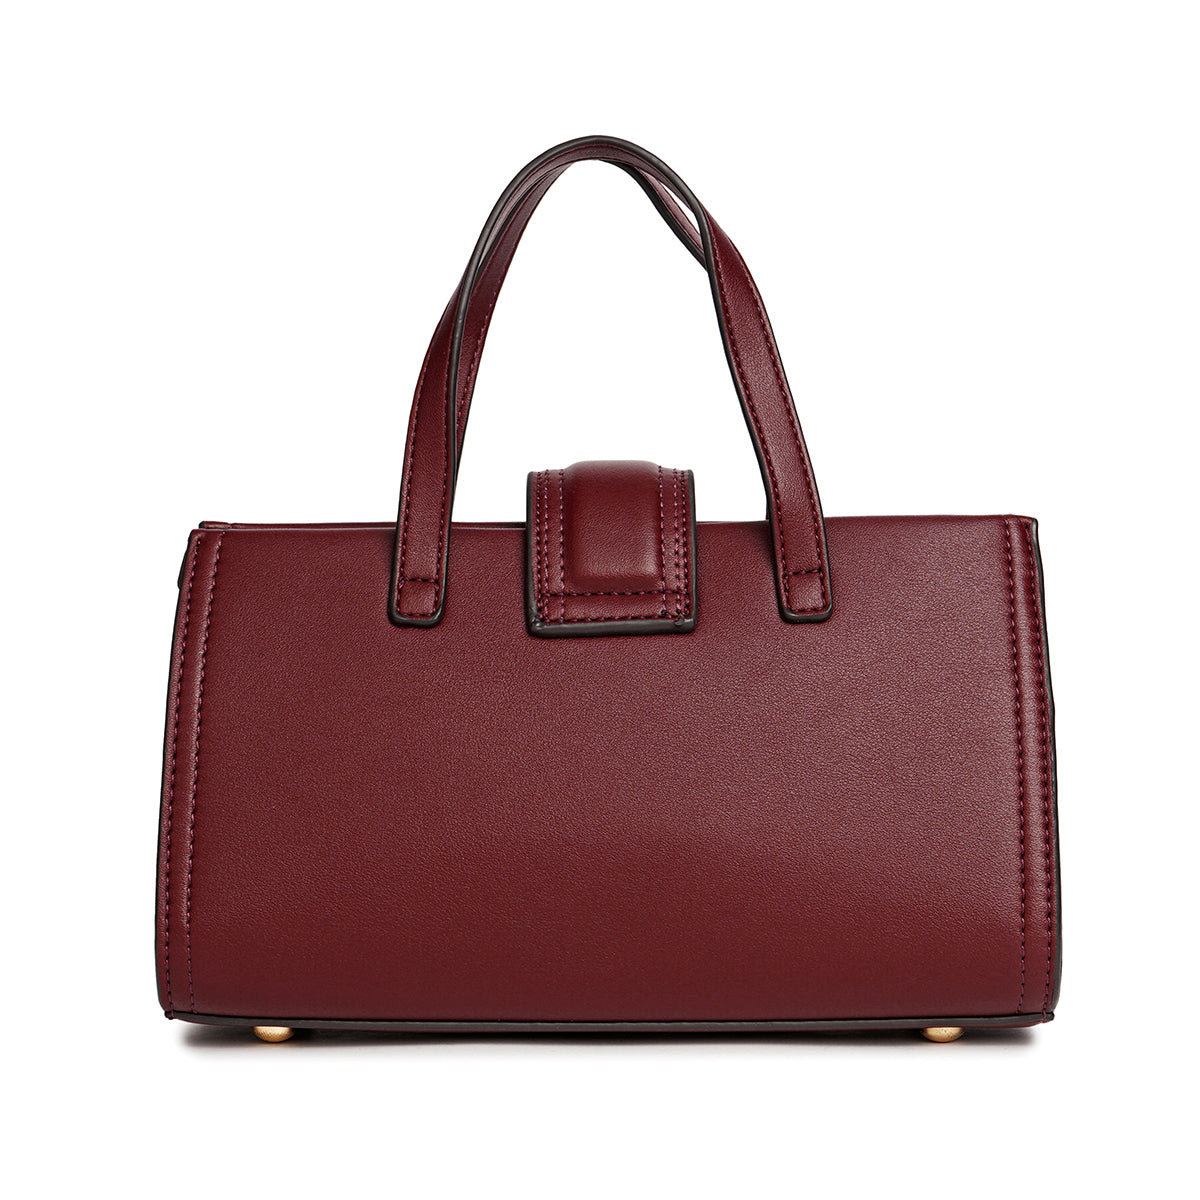 Small and elegant tote bag, 23 cm wide, in maroon or blue